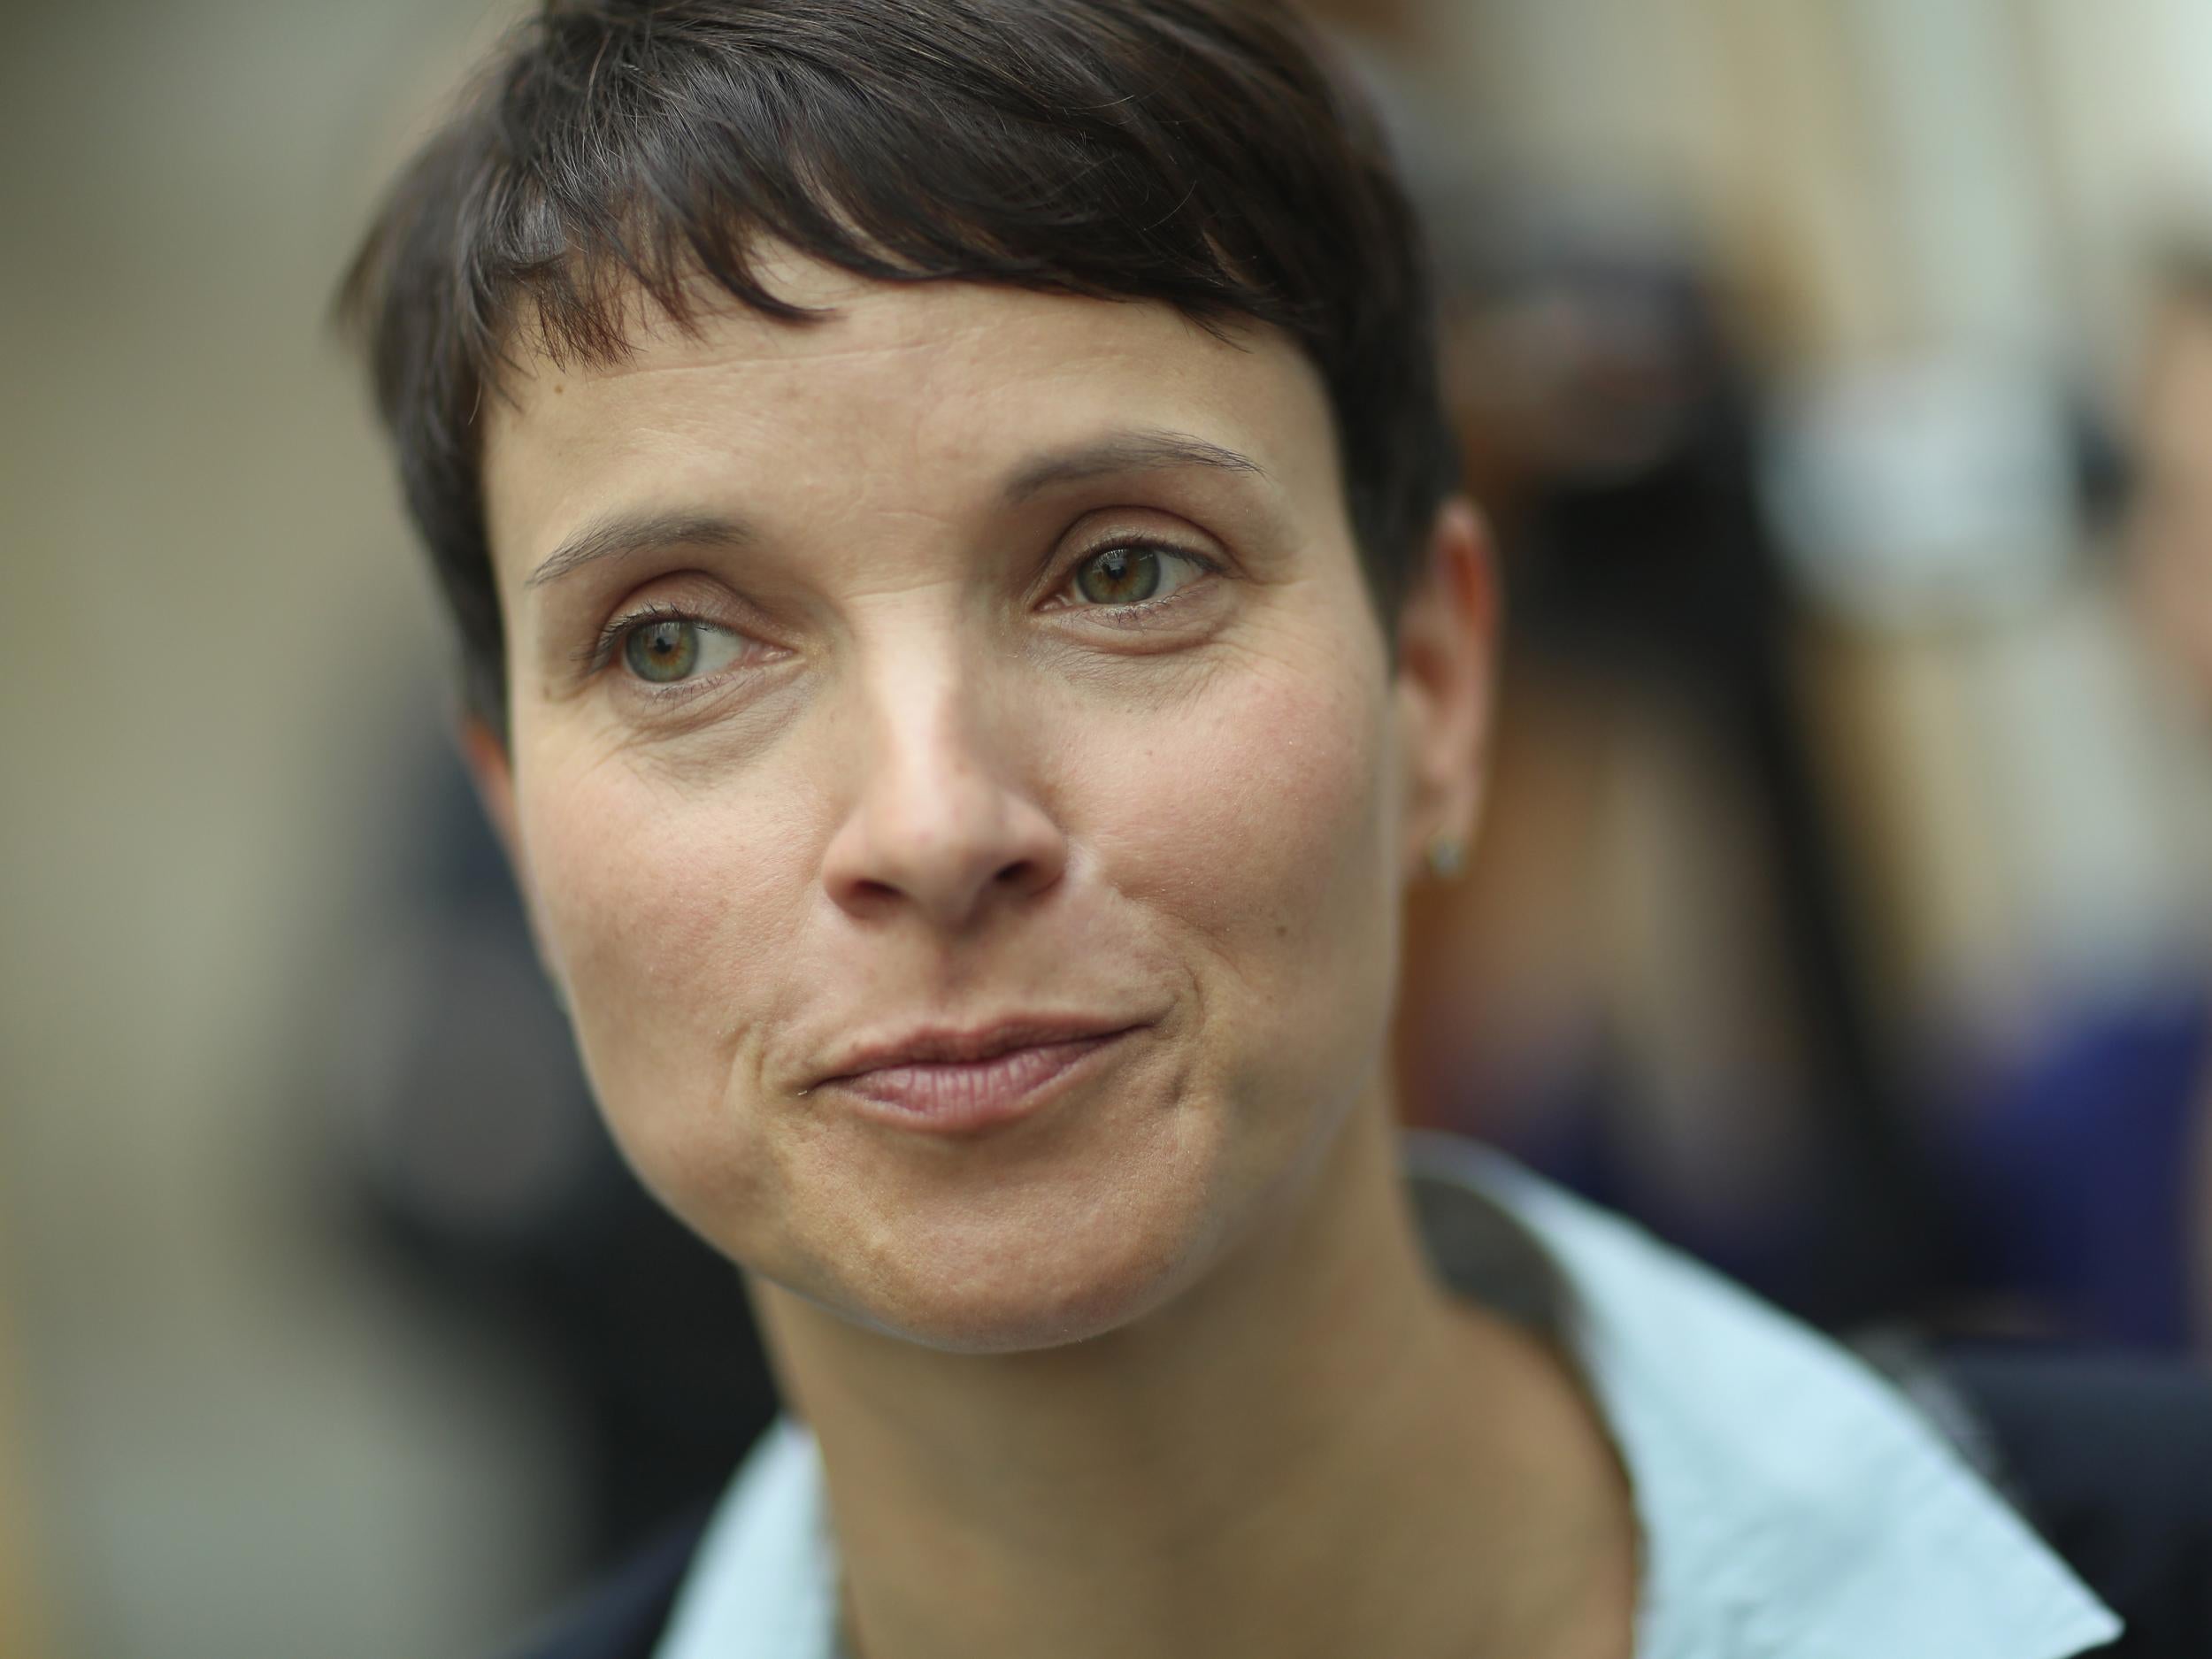 Frauke Petry, co-head of the Alternative fuer Deutschland (AfD) political party